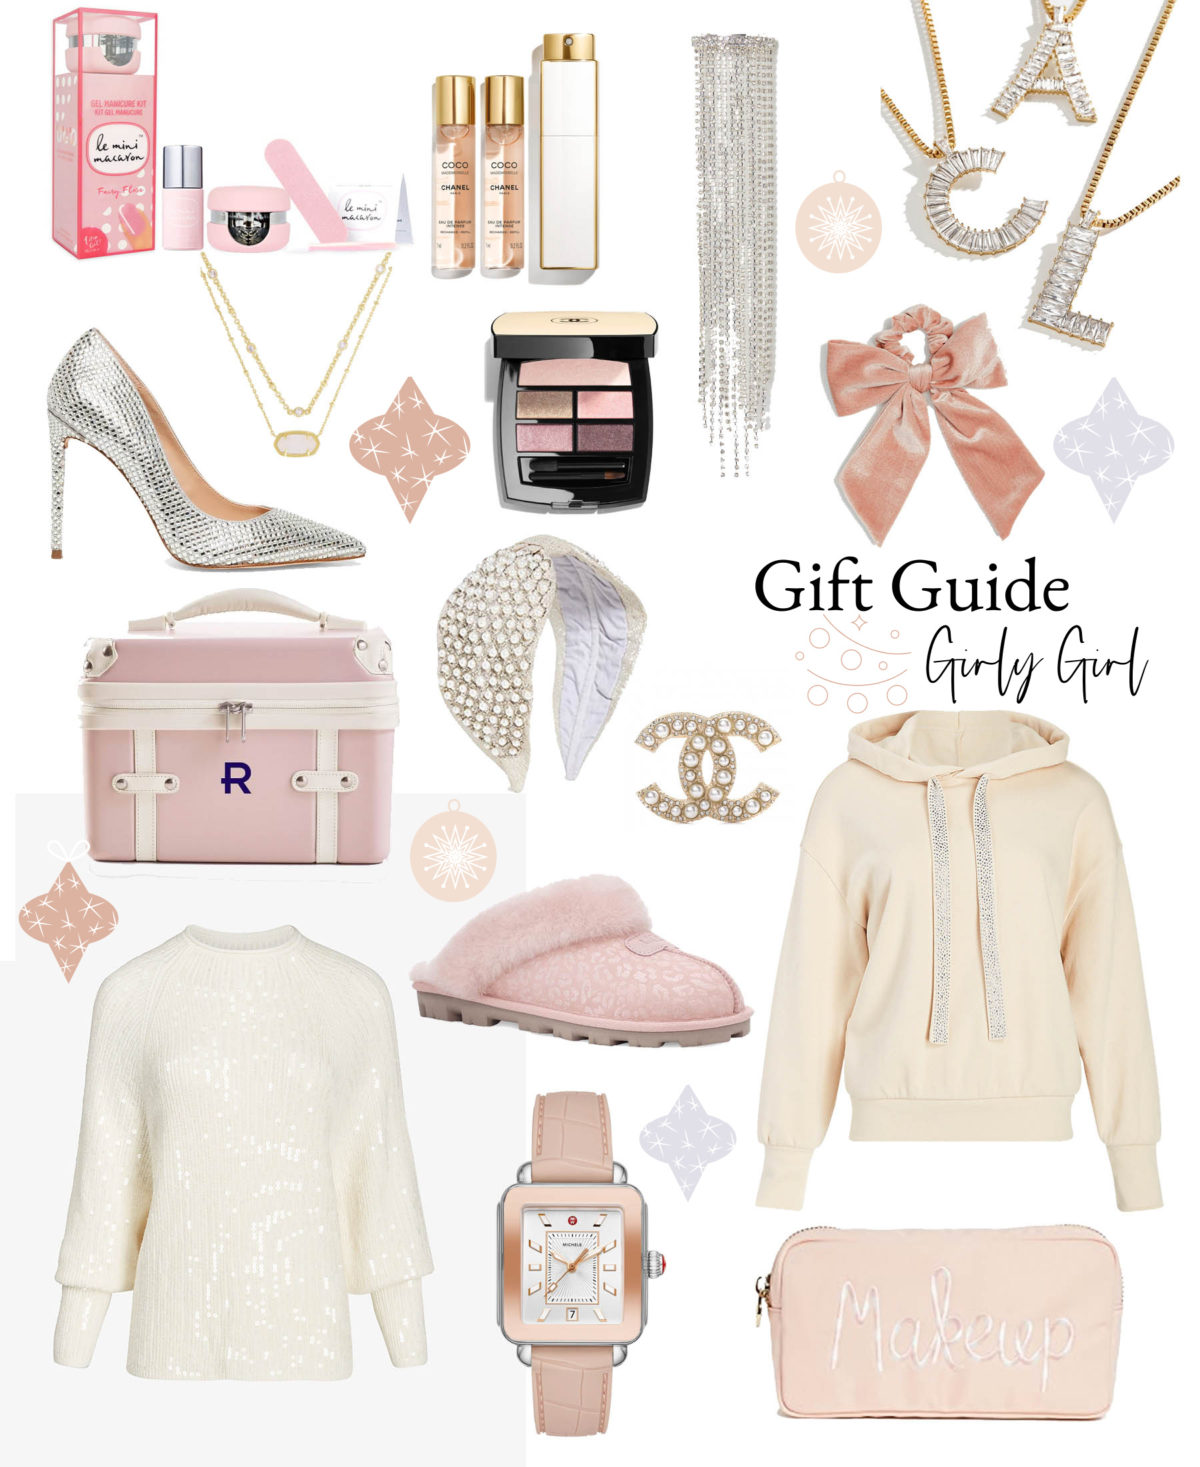 Gift Guides- Cozy Lover and For the Entertainer - Jimmy Choos & Tennis Shoes